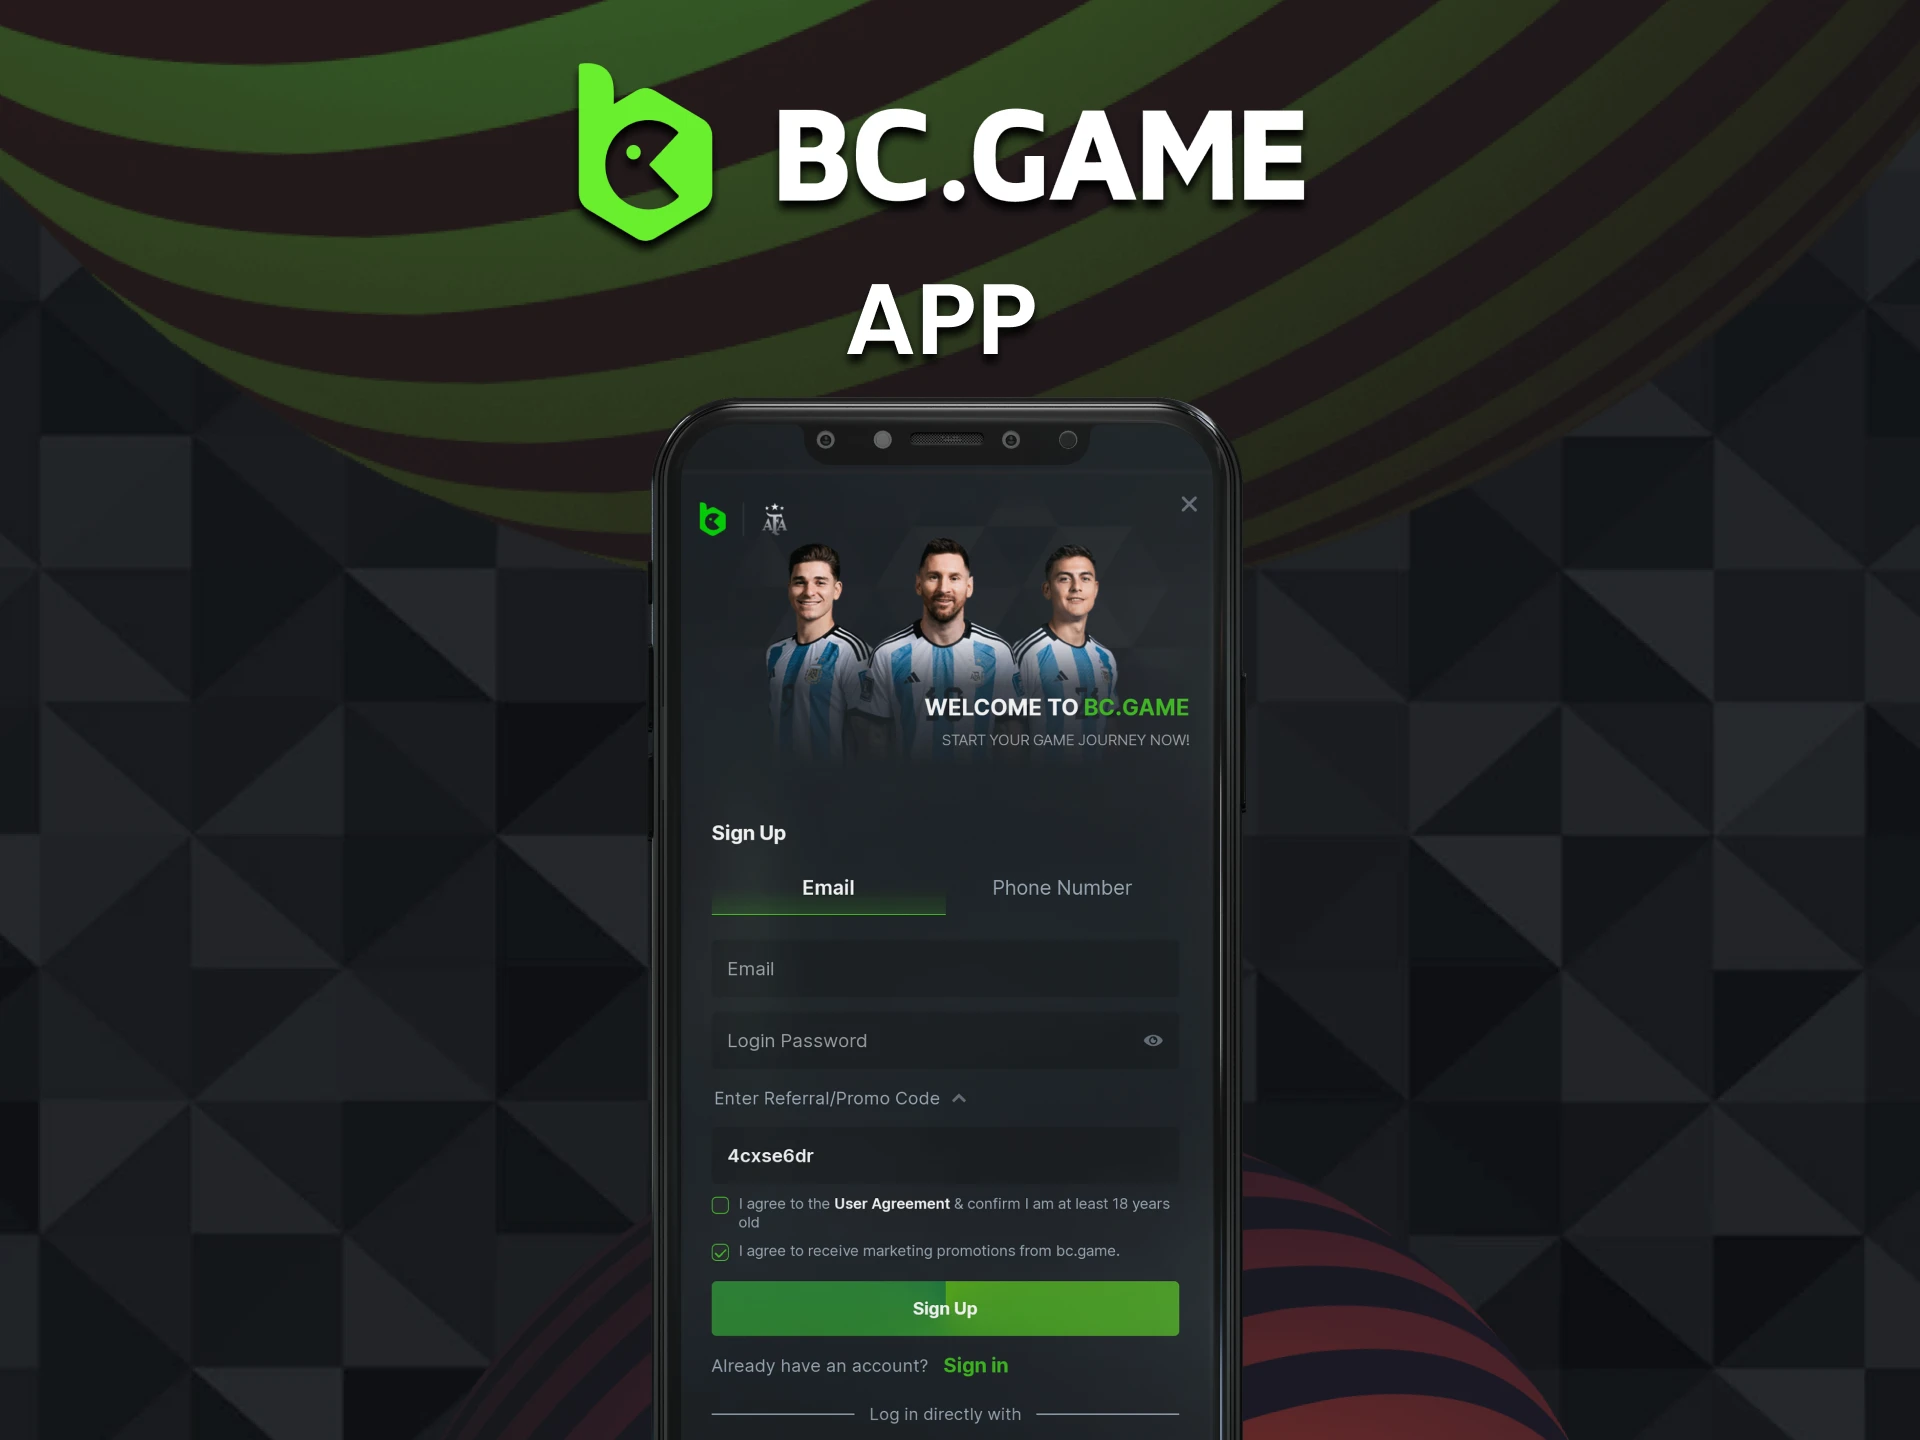 Register via the BC Game app on Android and iOS devices and start betting.